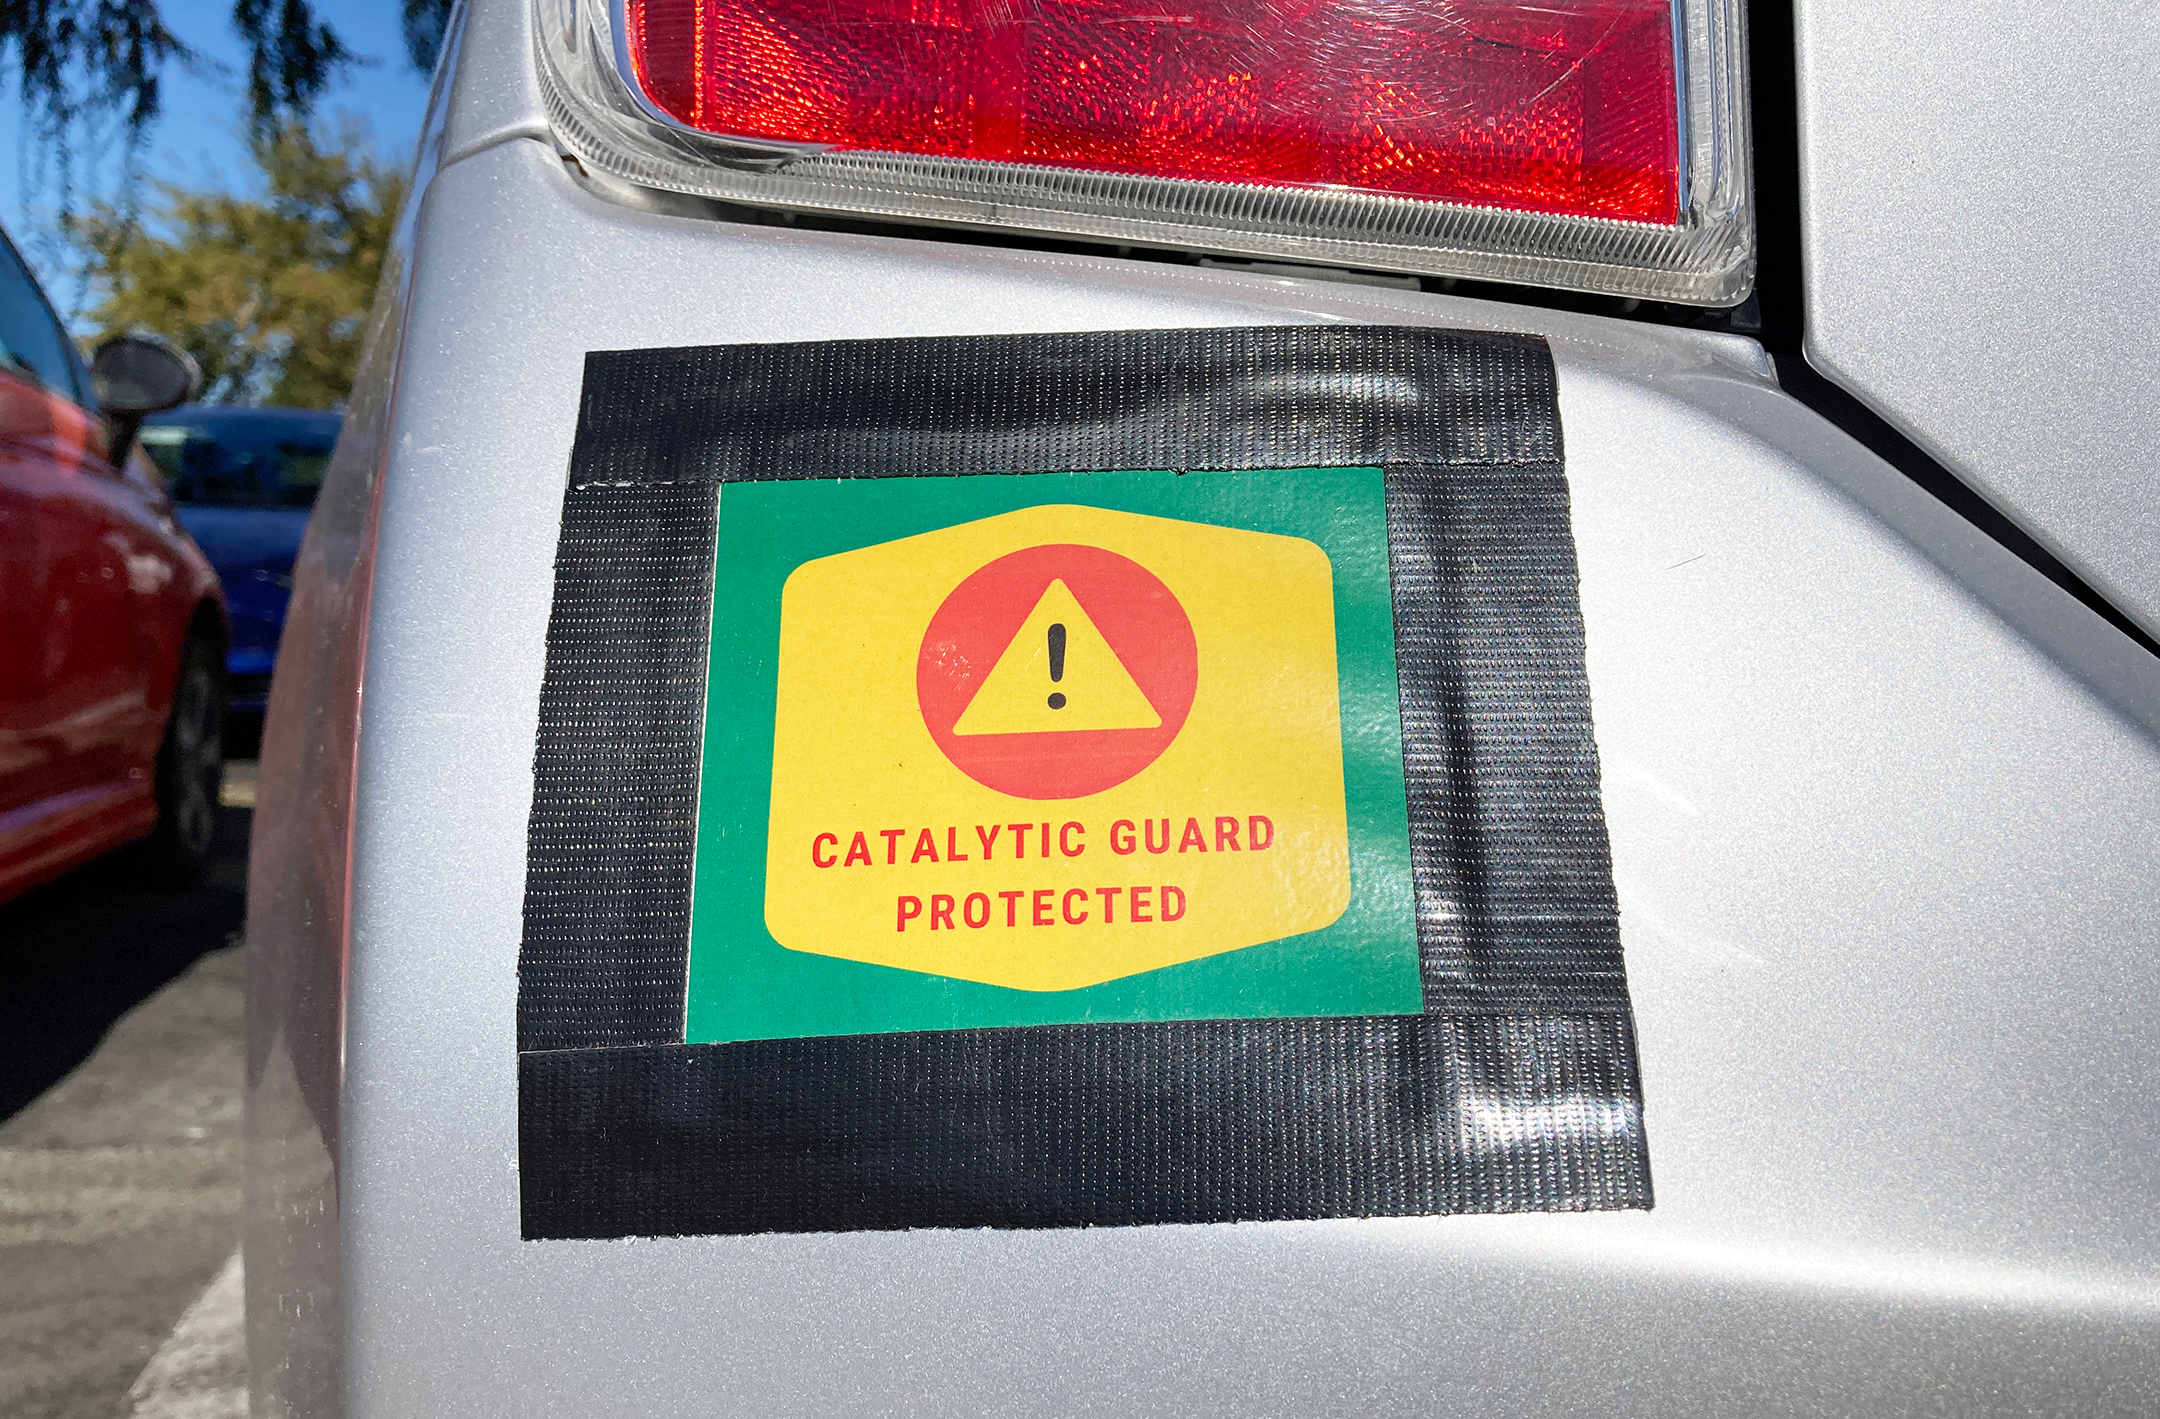 Catalytic Guard Protected sign on vehicle bumper